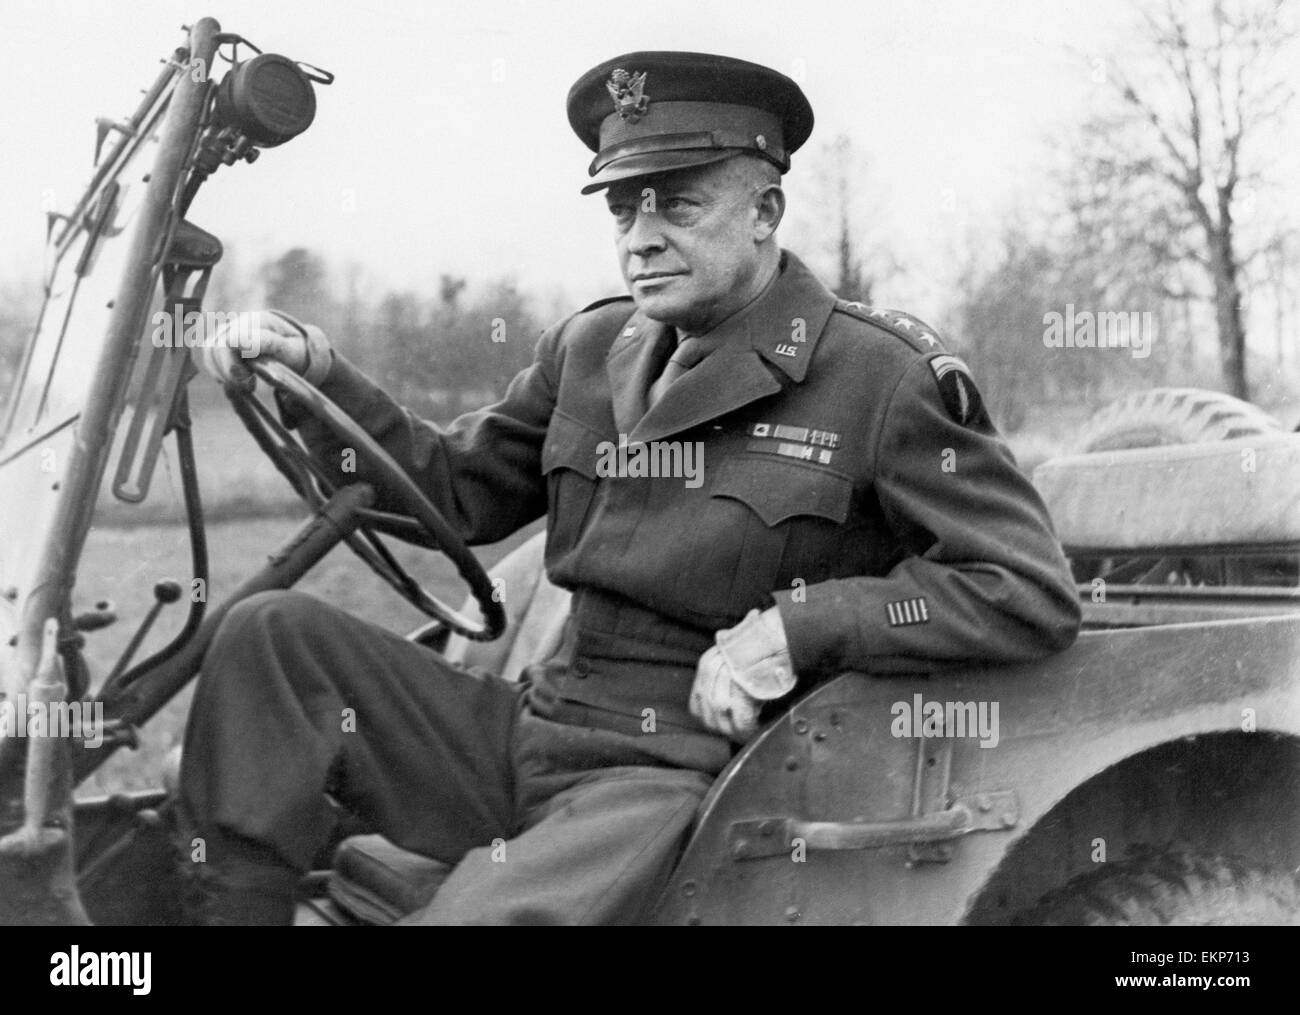 general-dwight-d-eisenhower-seated-in-a-jeep-on-his-way-to-deliver-EKP713.jpg